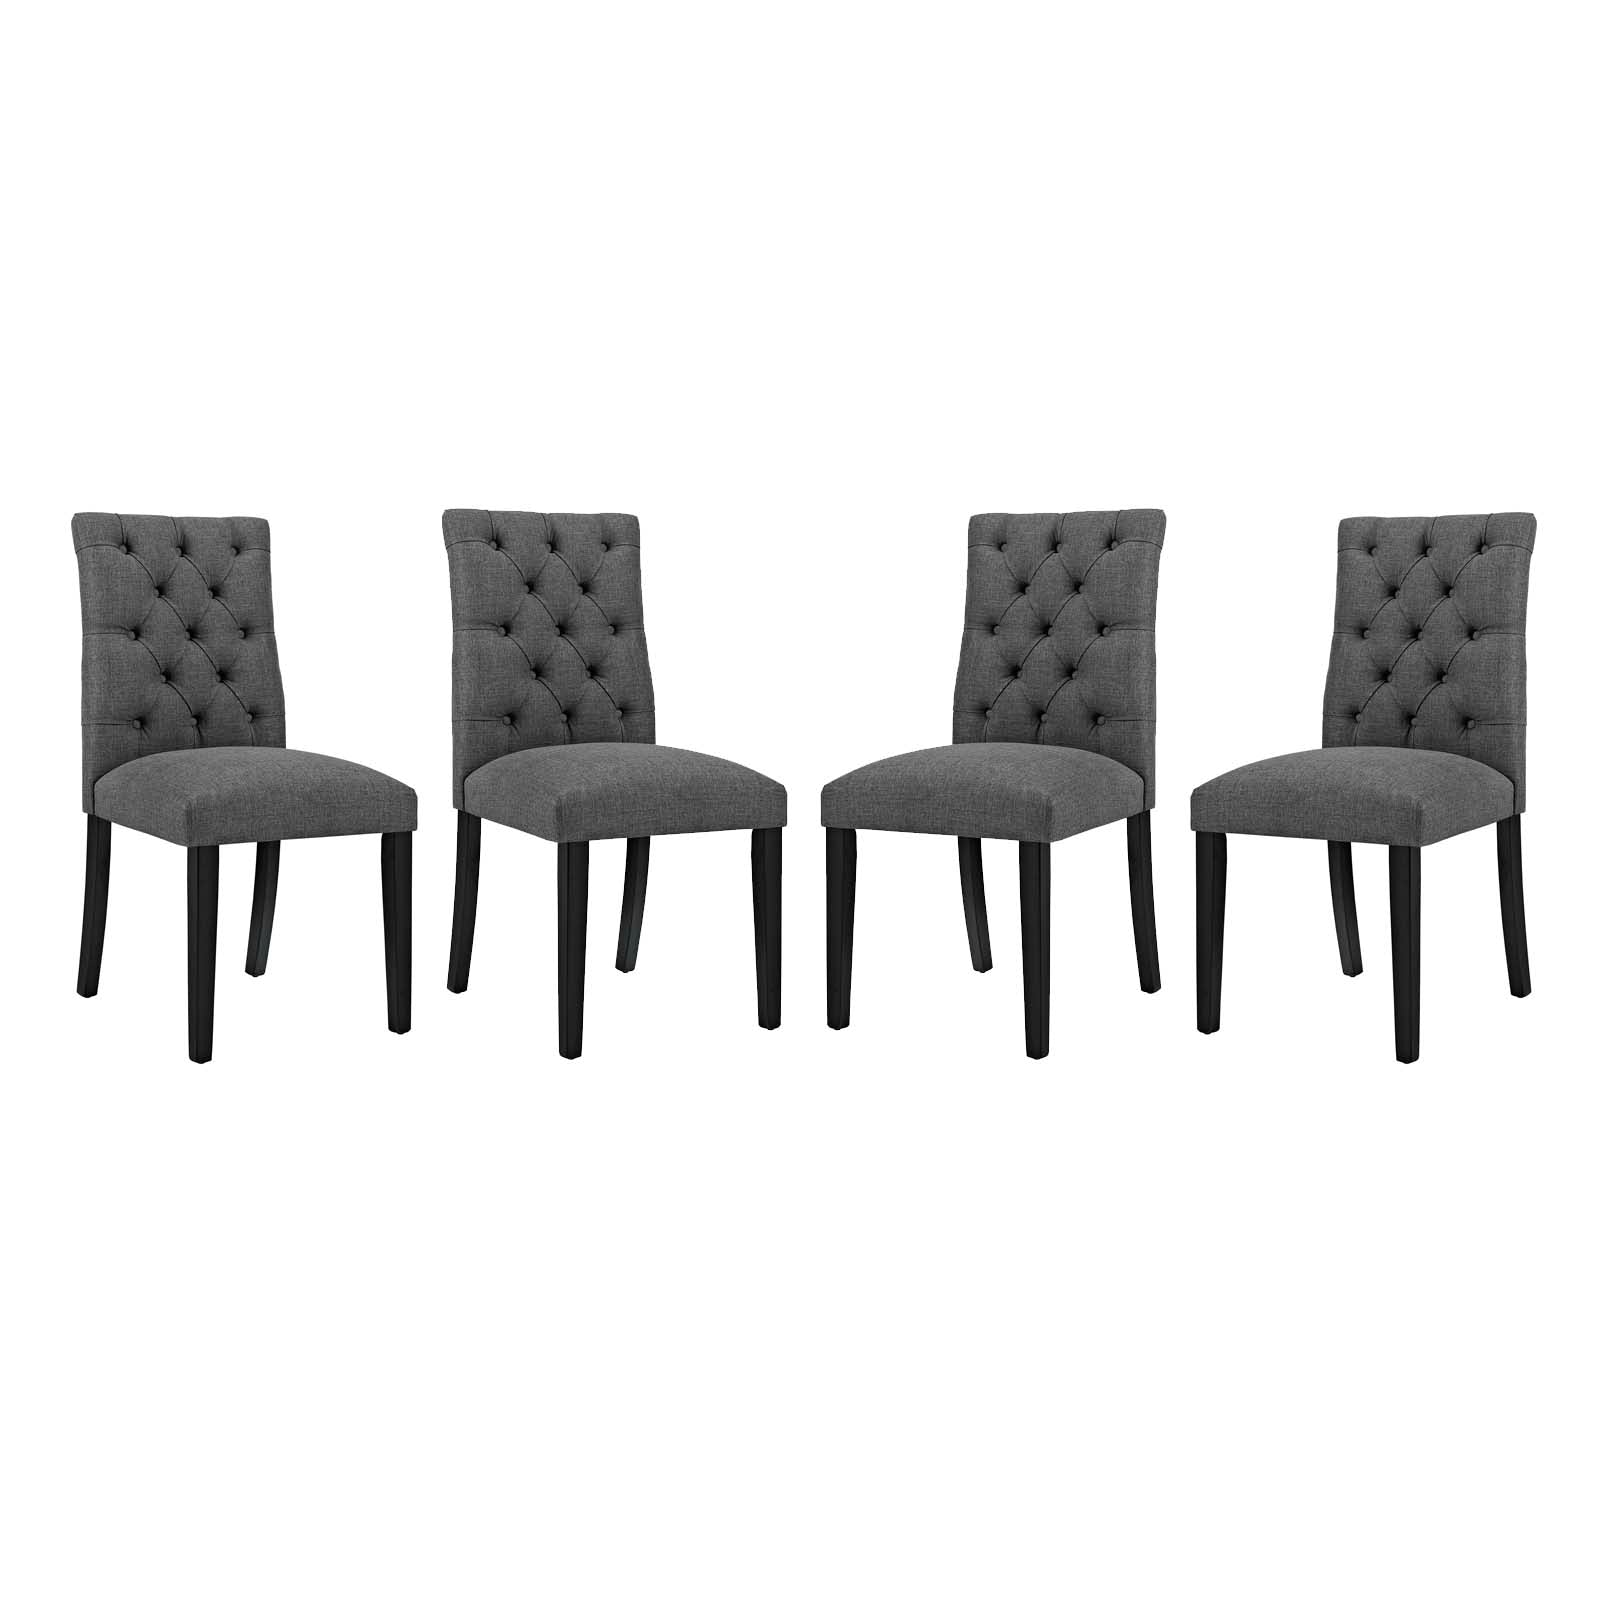 Modway Dining Chairs - Duchess Dining Chair Fabric ( Set of 4 ) Gray